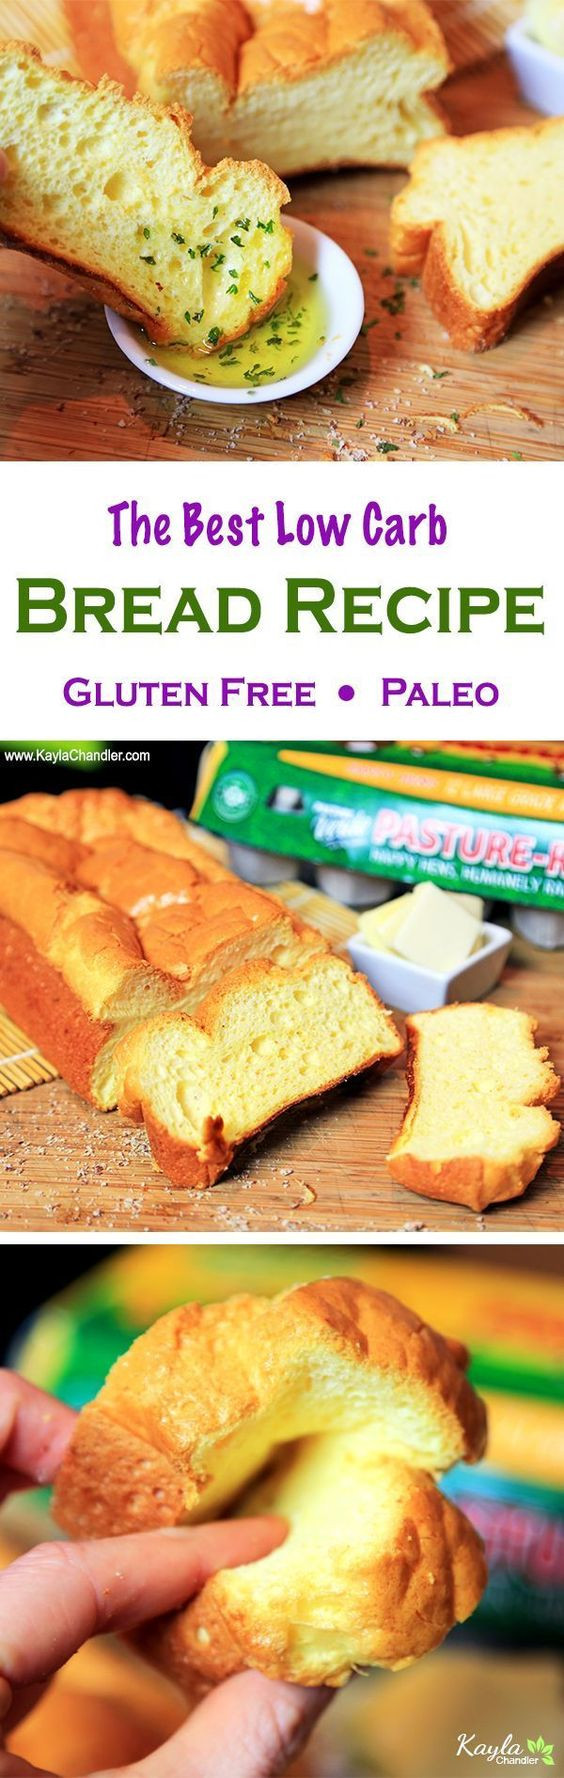 Healthy Life Low Carb Bread
 Low Carb Gluten Free Bread Recipe